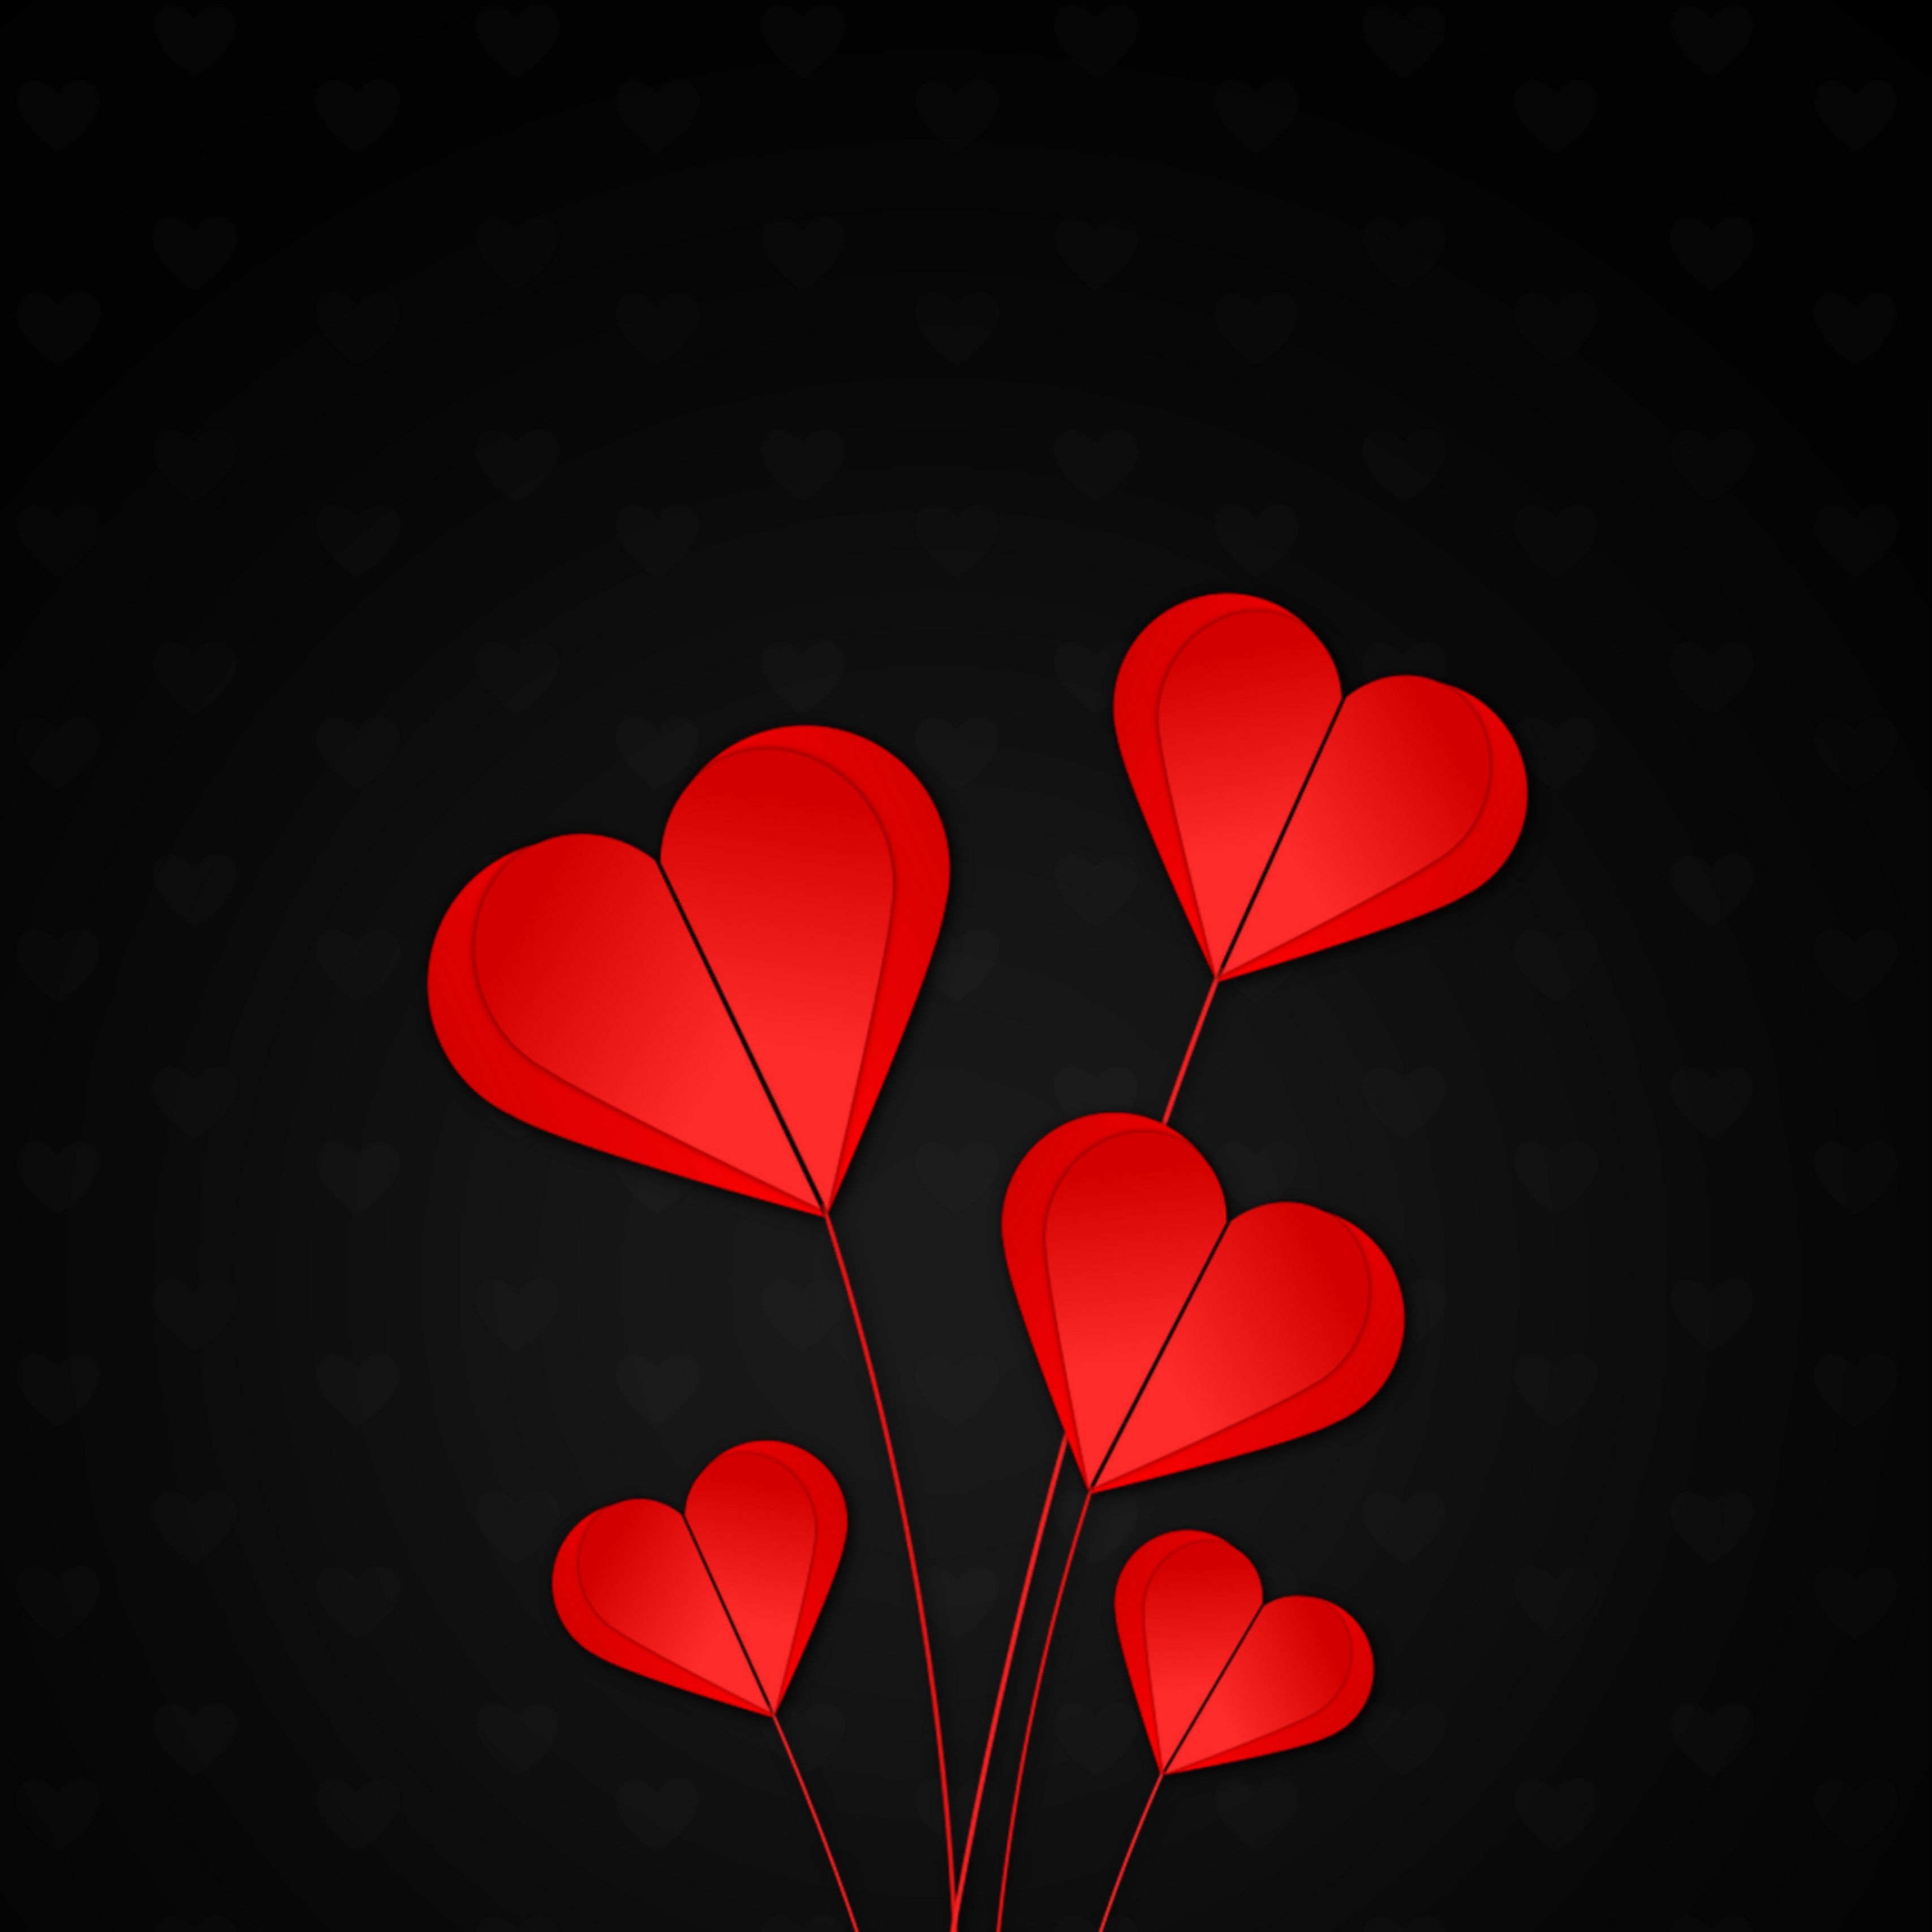 Wallpaper Hearts, Red, Black Background - Heart Flowers With Black Background , HD Wallpaper & Backgrounds